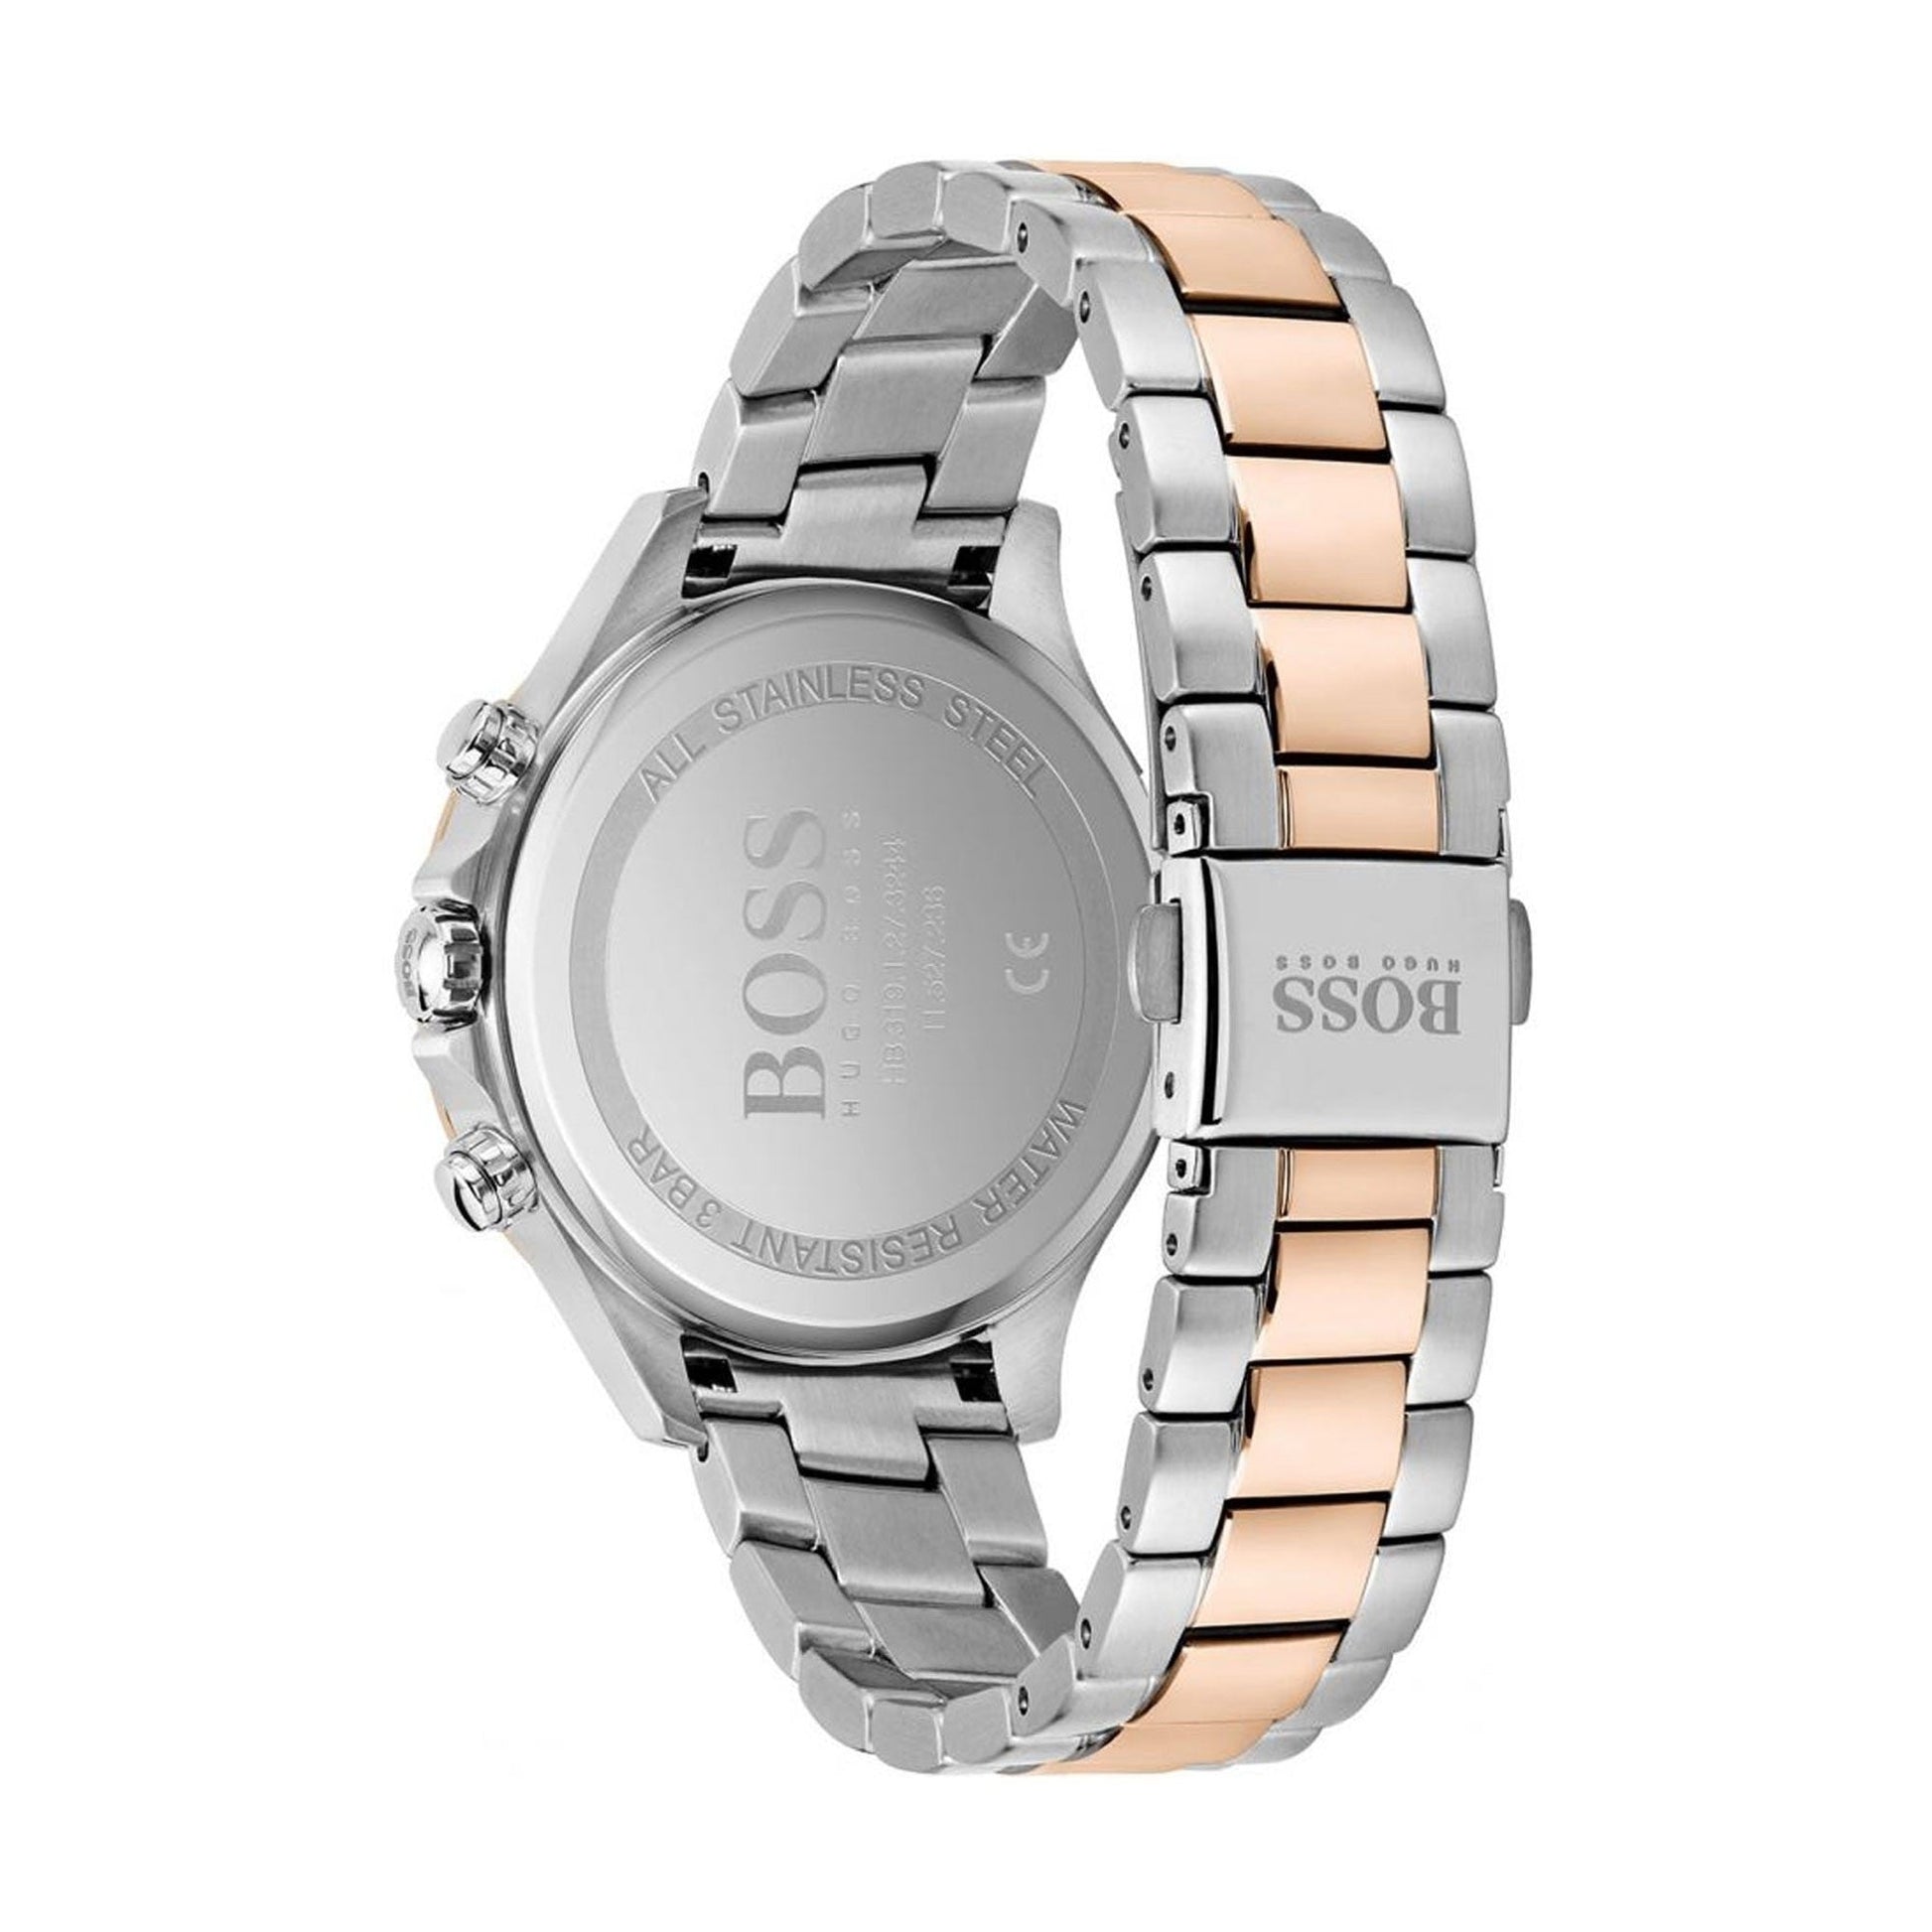 Hugo Boss Signature Silver Dial Two Tone Steel Strap Watch for Women - 1502567